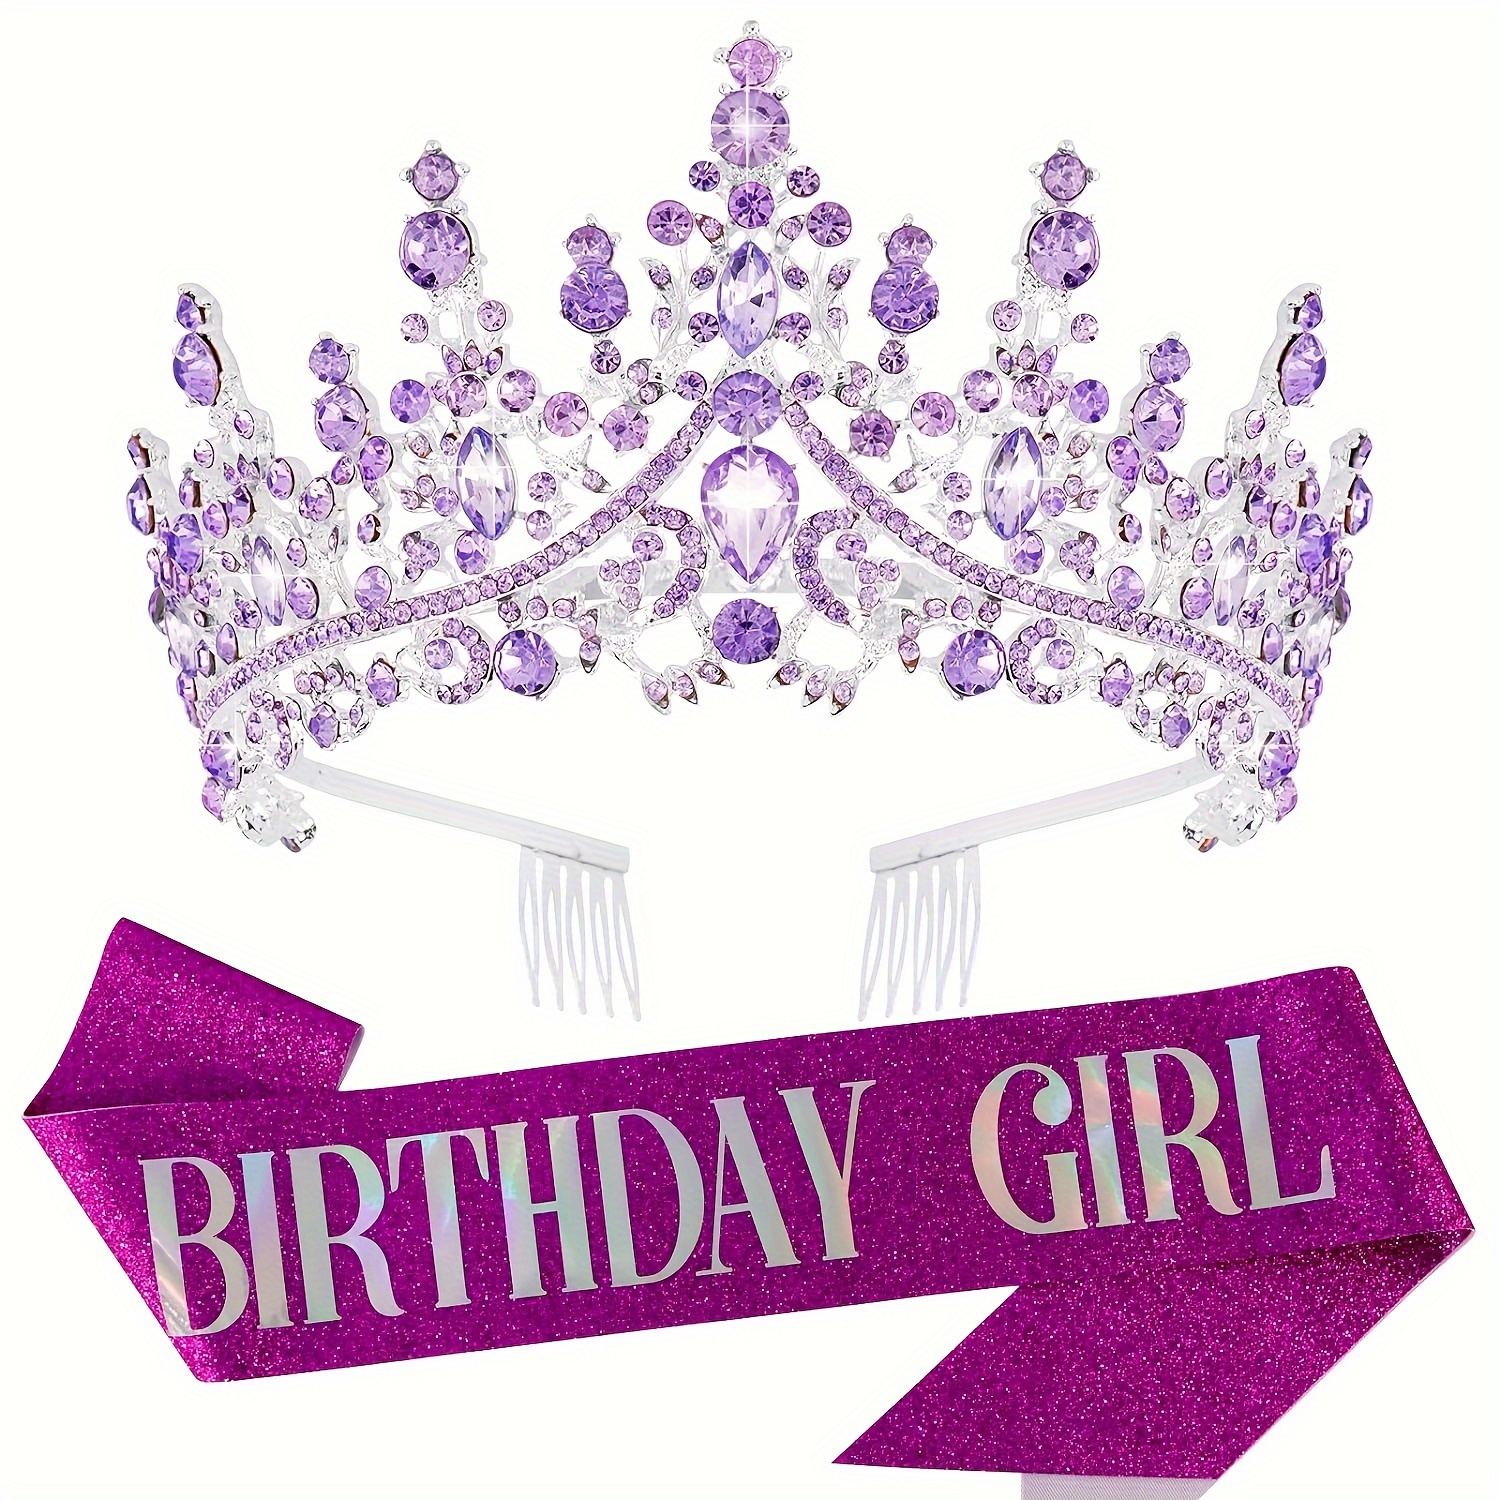 

Baroque Style Princess Crystal Birthday Crown & Glittering Sash Set - 2 Piece Tiara And Belt Combo For Happy Birthday Party Accessory - Perfect Gift For Daughter, Best Friend, Women